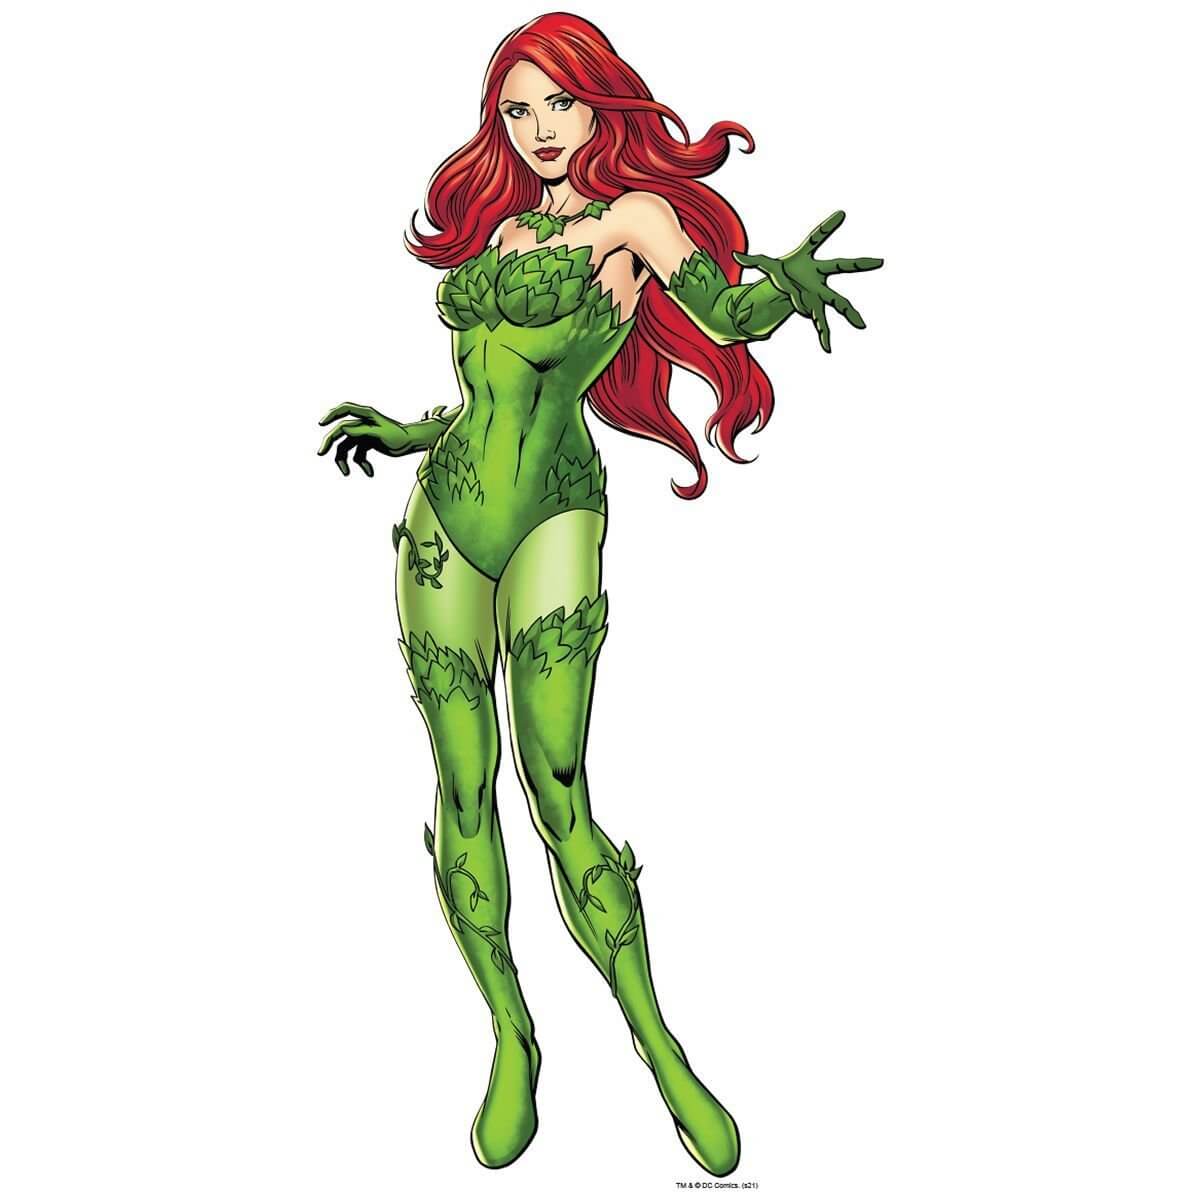 Kismet Decals Poison Ivy Daunting Licensed Wall Sticker - Easy DIY Justice League Home & Room Decor Wall Art - Kismet Decals